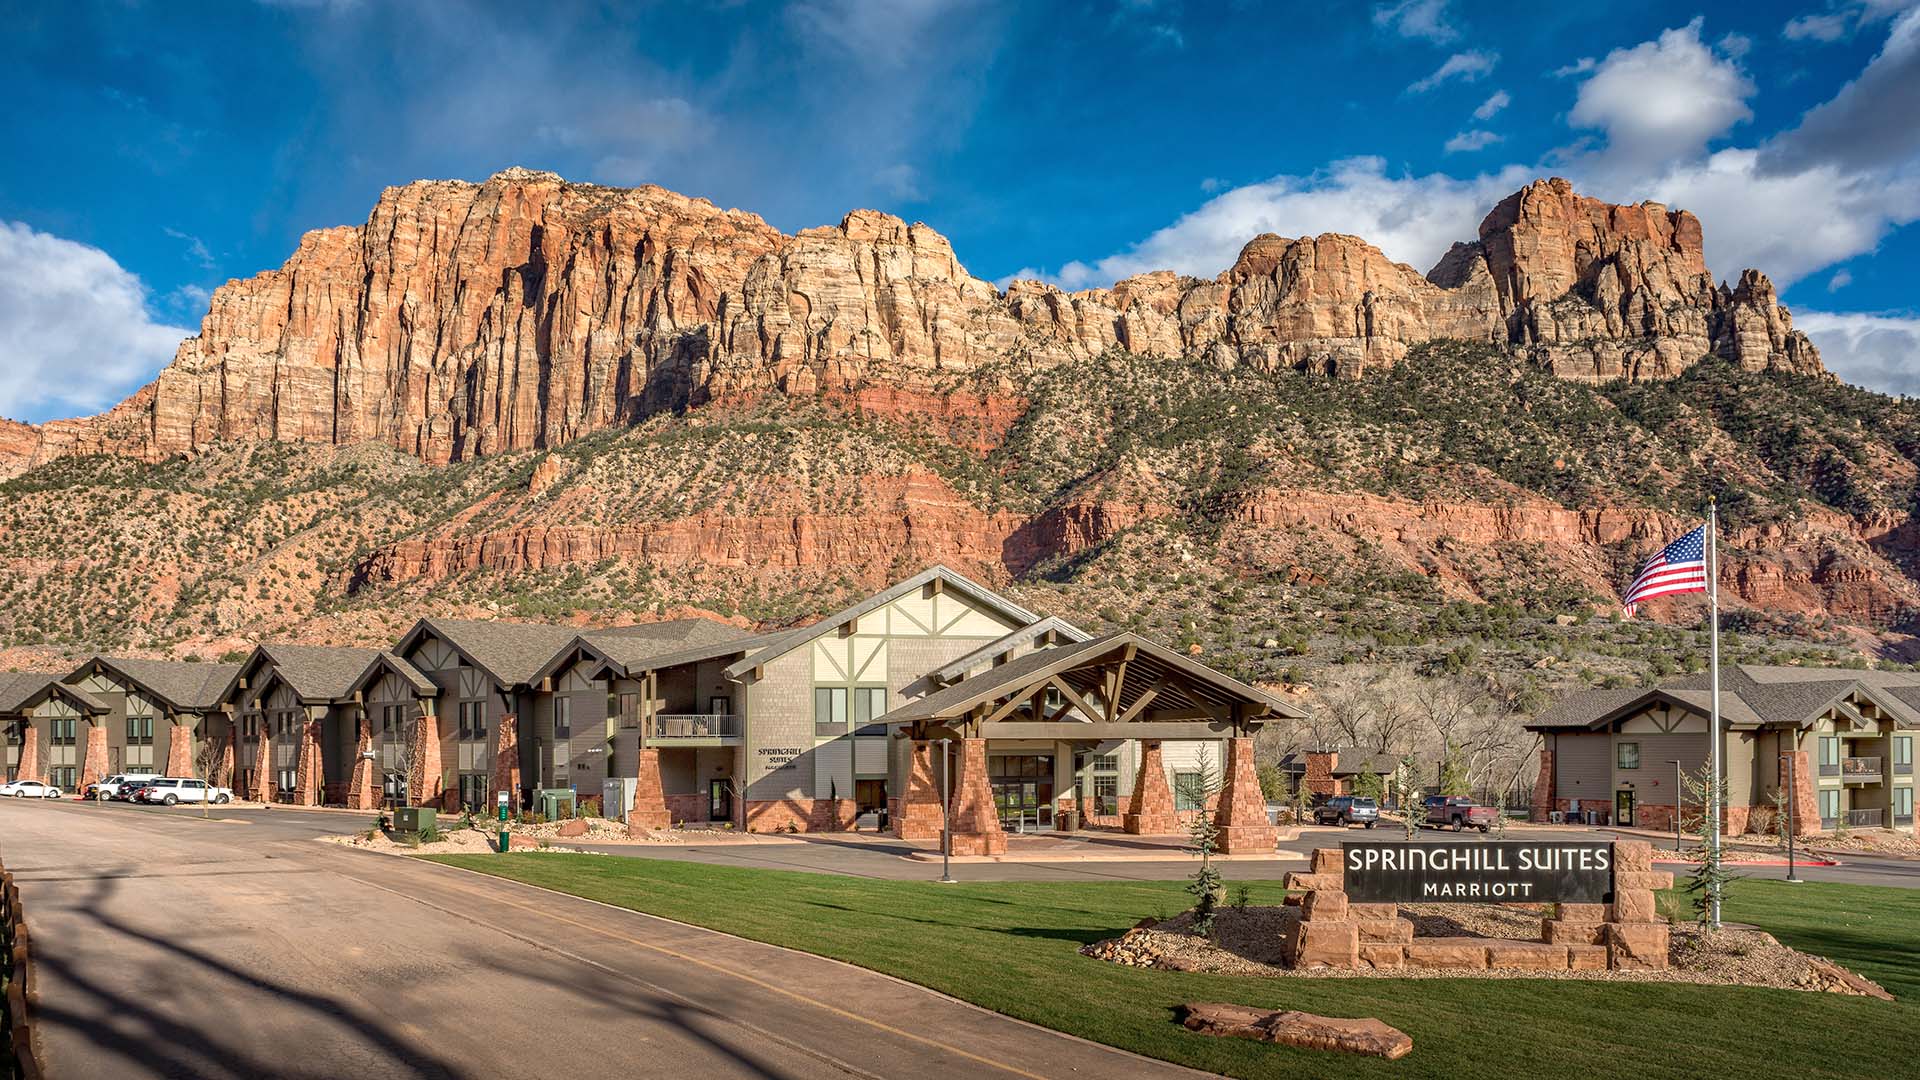 Springhill suites Zion in front of Zion National Park rock formations